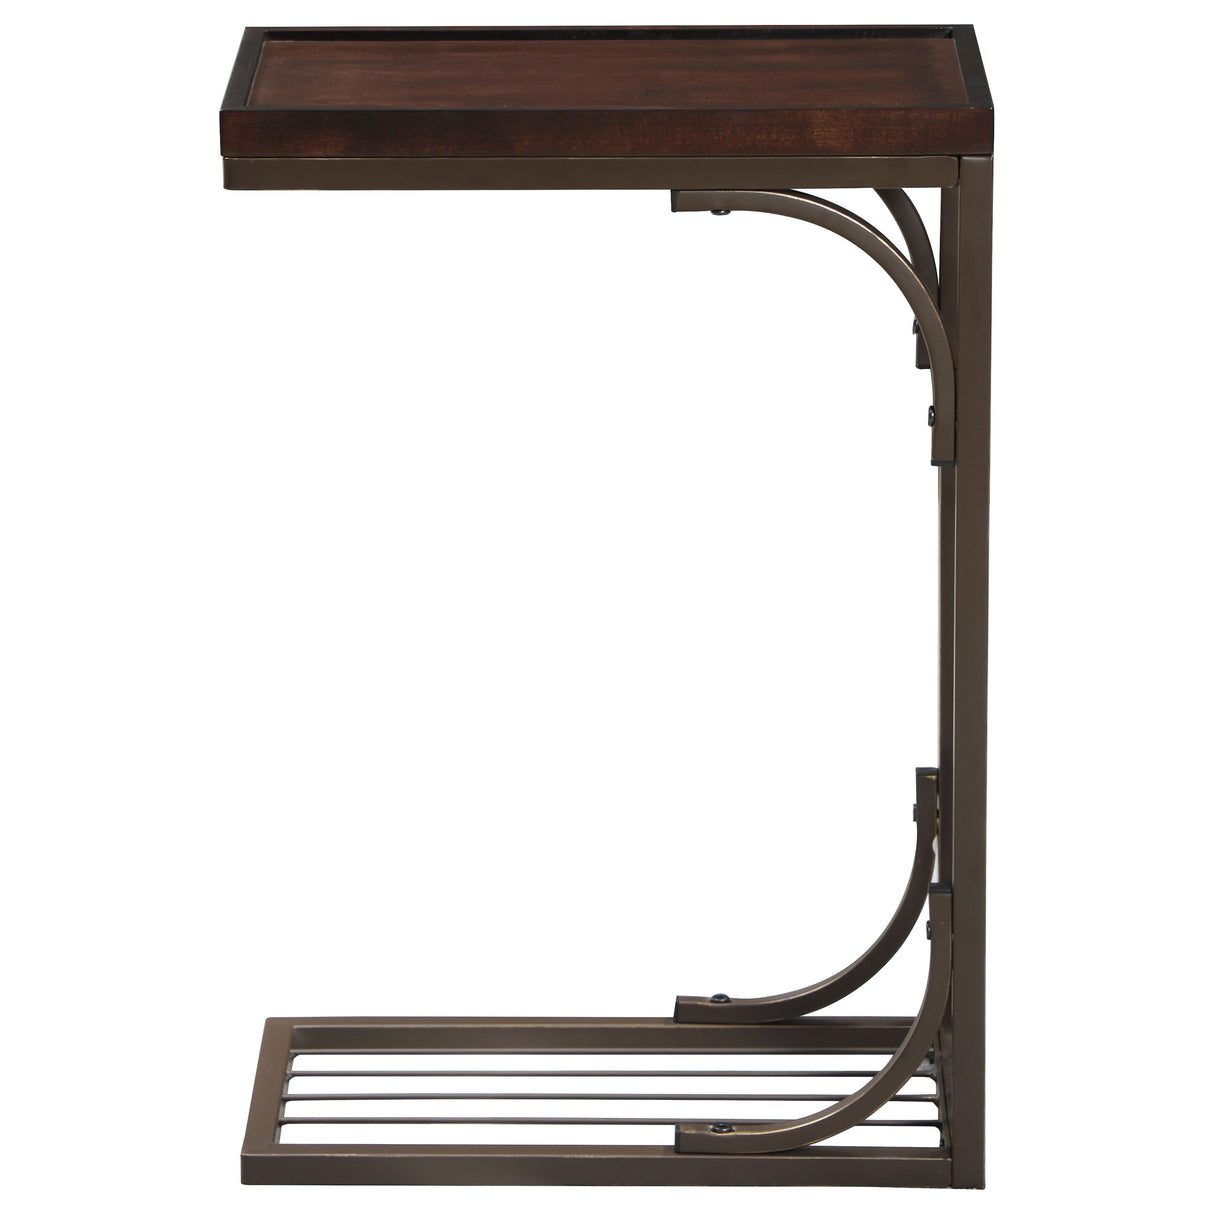 Side Table - Alyssa Accent Table Brown and Burnished Copper